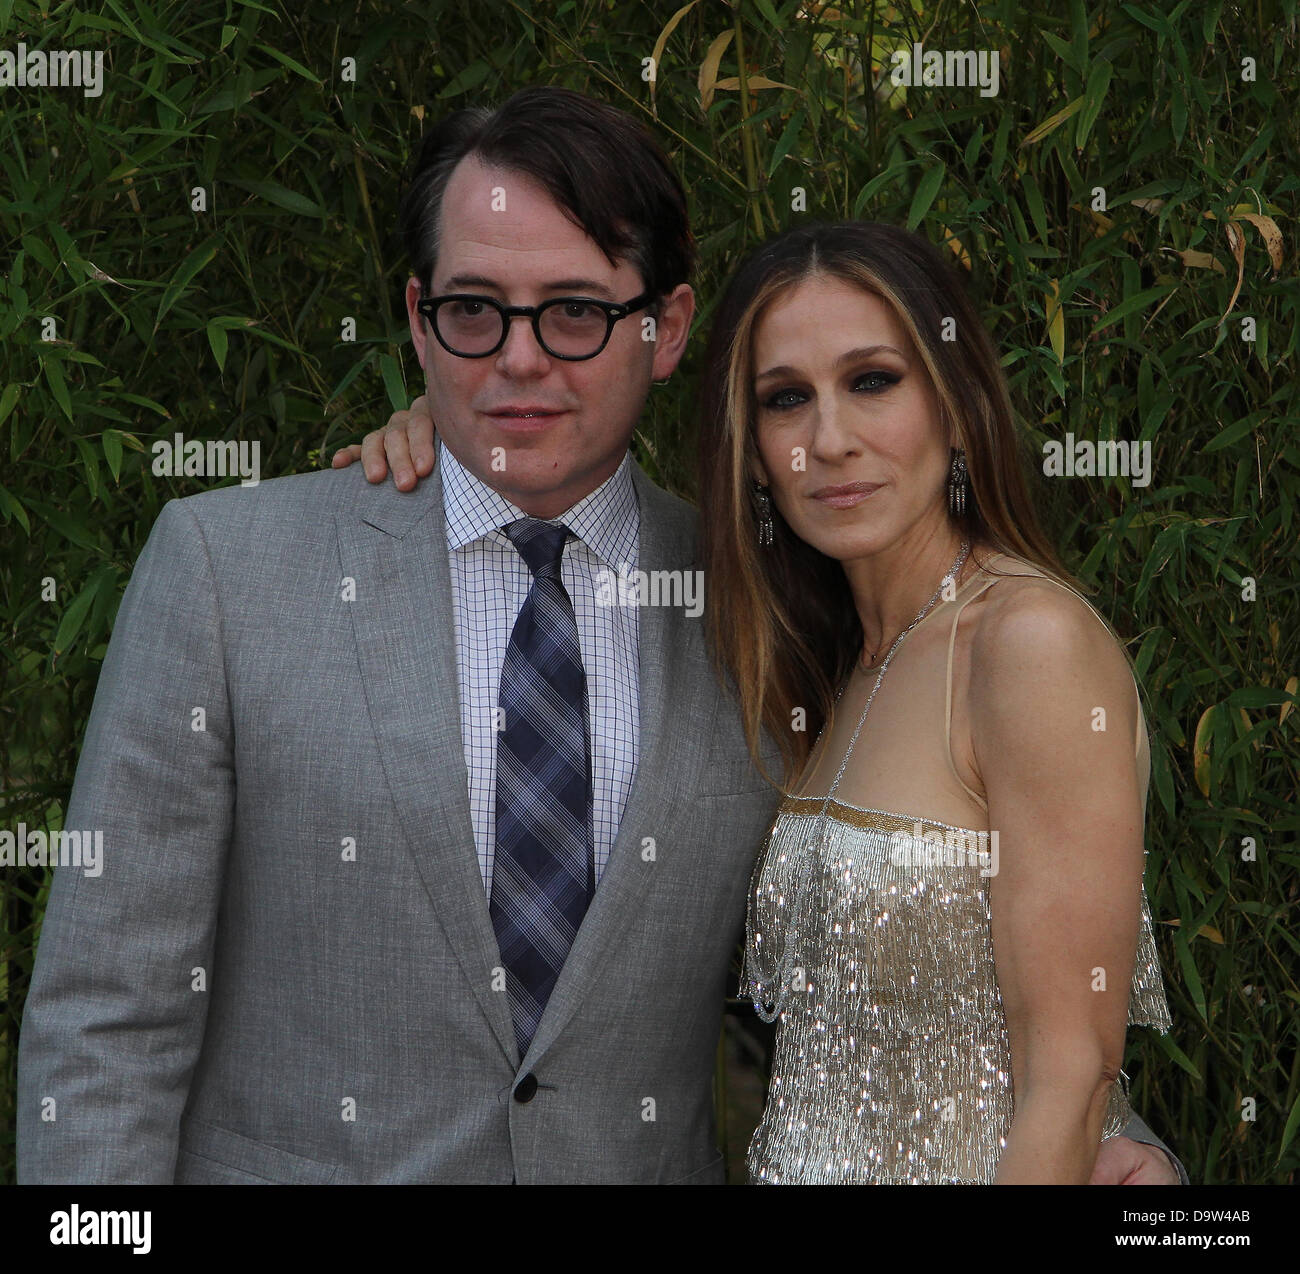 London, UK, 26th June, 2013: Matthew Broderick and Sarah Jessica Parker attend the annual Serpentine Gallery summer party at The Stock Photo